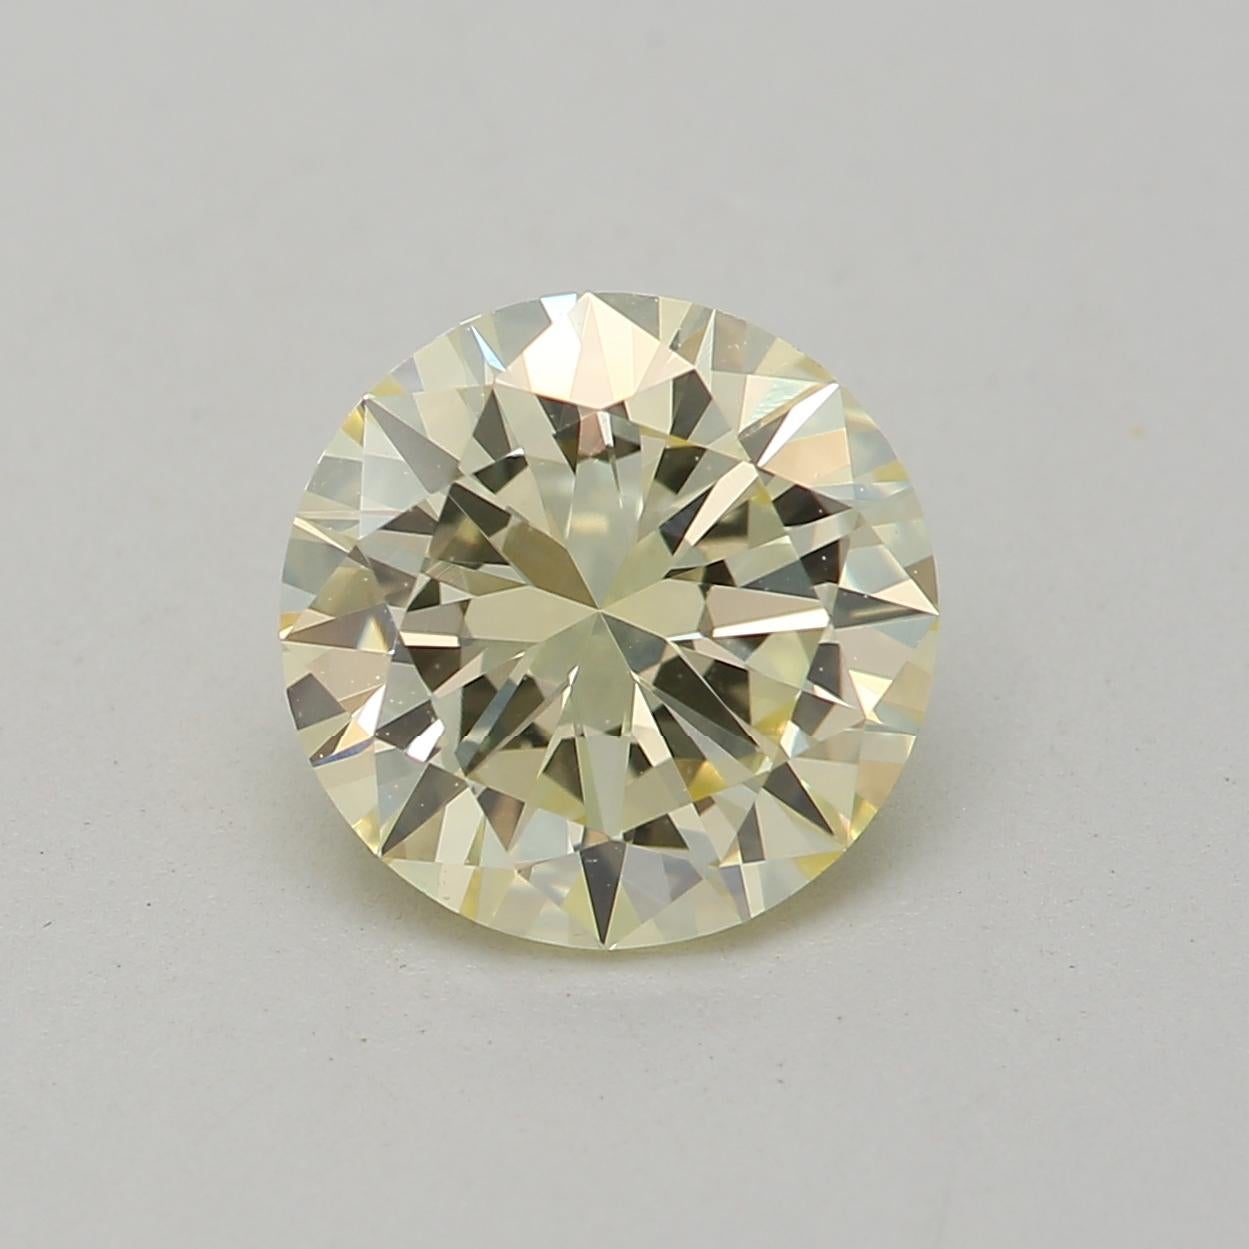 **100% NATURAL FANCY COLOUR DIAMOND**

✪ Diamond Details ✪

➛ Shape: Round
➛ Colour Grade: W-X
➛ Carat: 1.10
➛ Clarity: VS1
➛ GIA Certified 

^FEATURES OF THE DIAMOND^

This 1.1 carat diamond is a gemstone that weighs 1.1 carats, indicating its